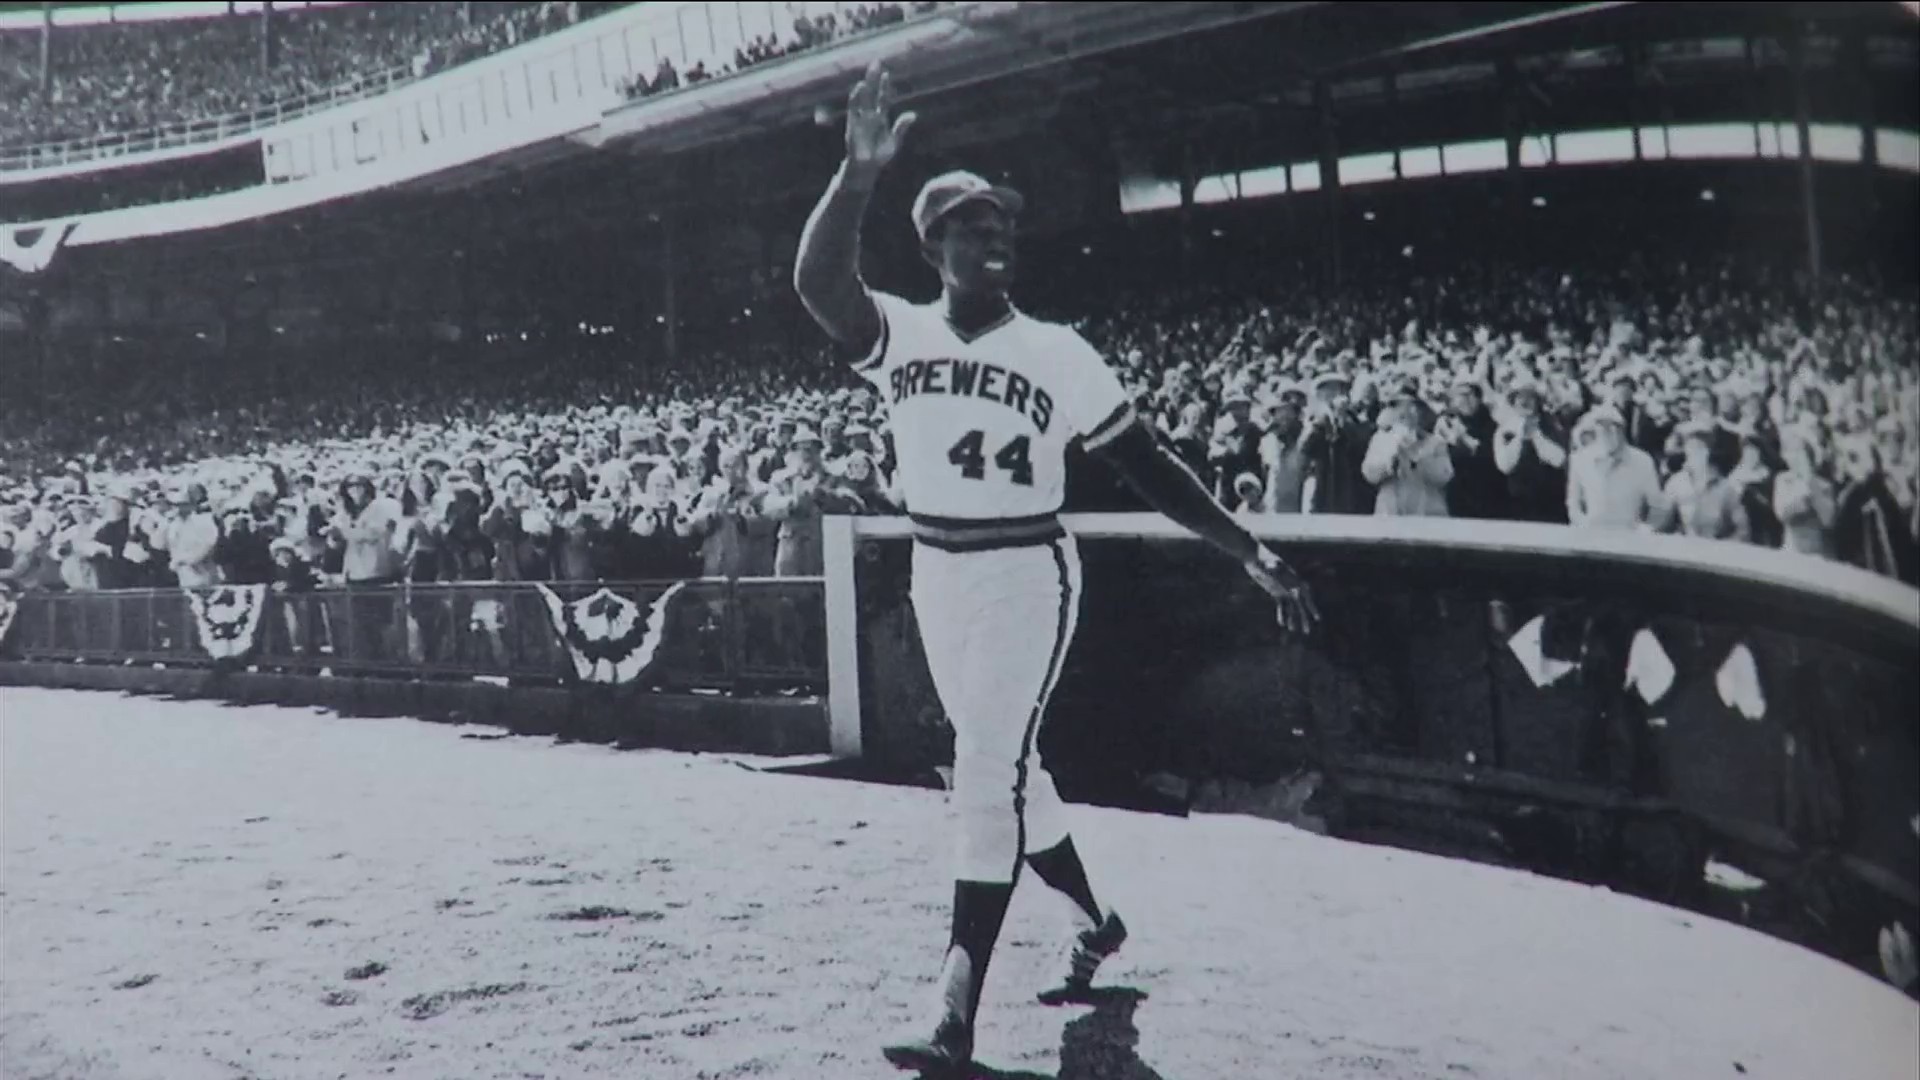 City Council approves adding Hank Aaron's name to Durkeeville ballpark